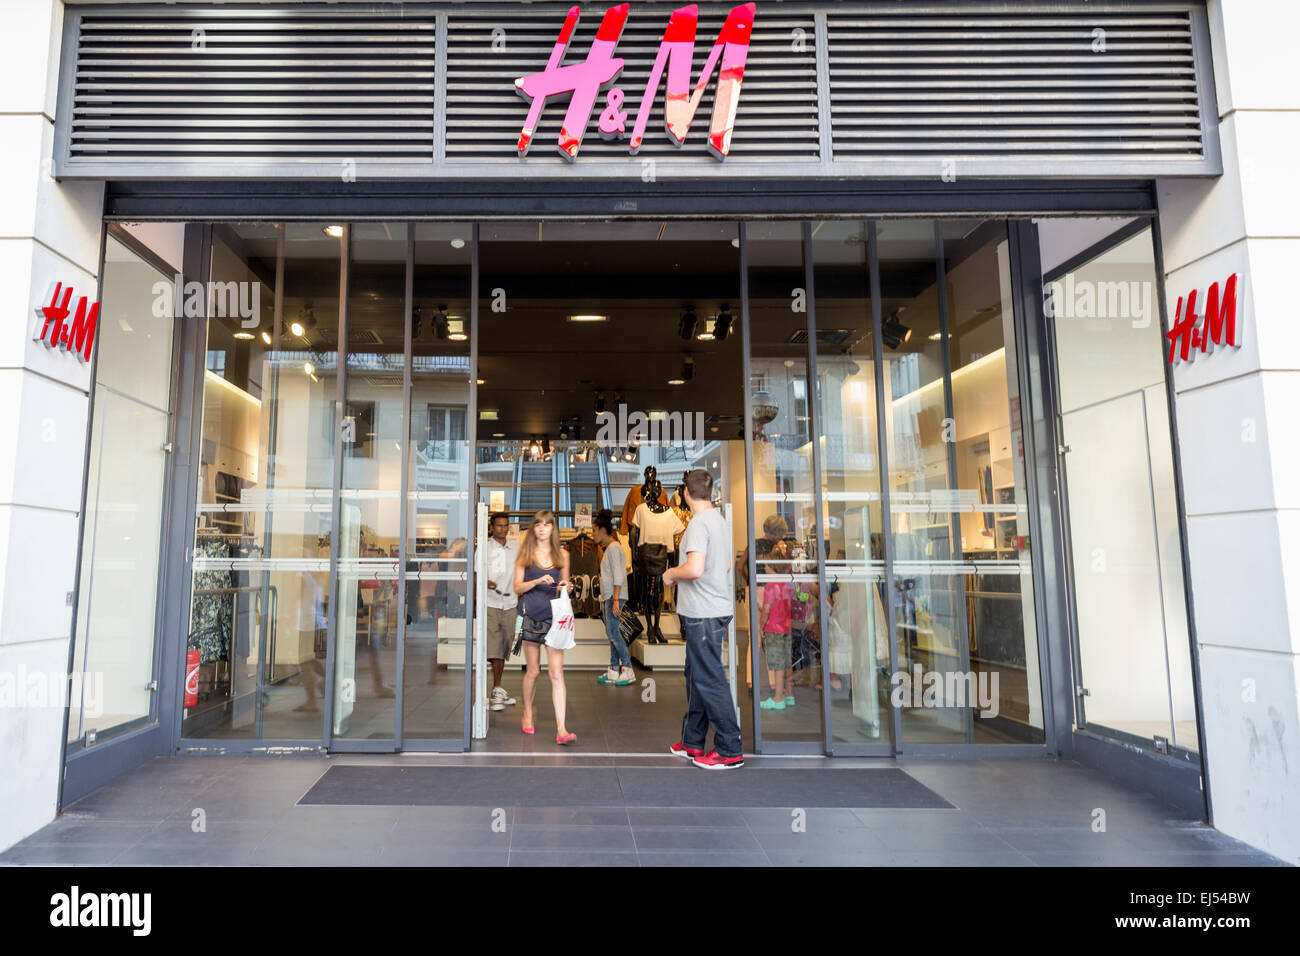 H&M - Hennes & Mauritz shop in Avignon, France, Europe Stock Photo - Alamy